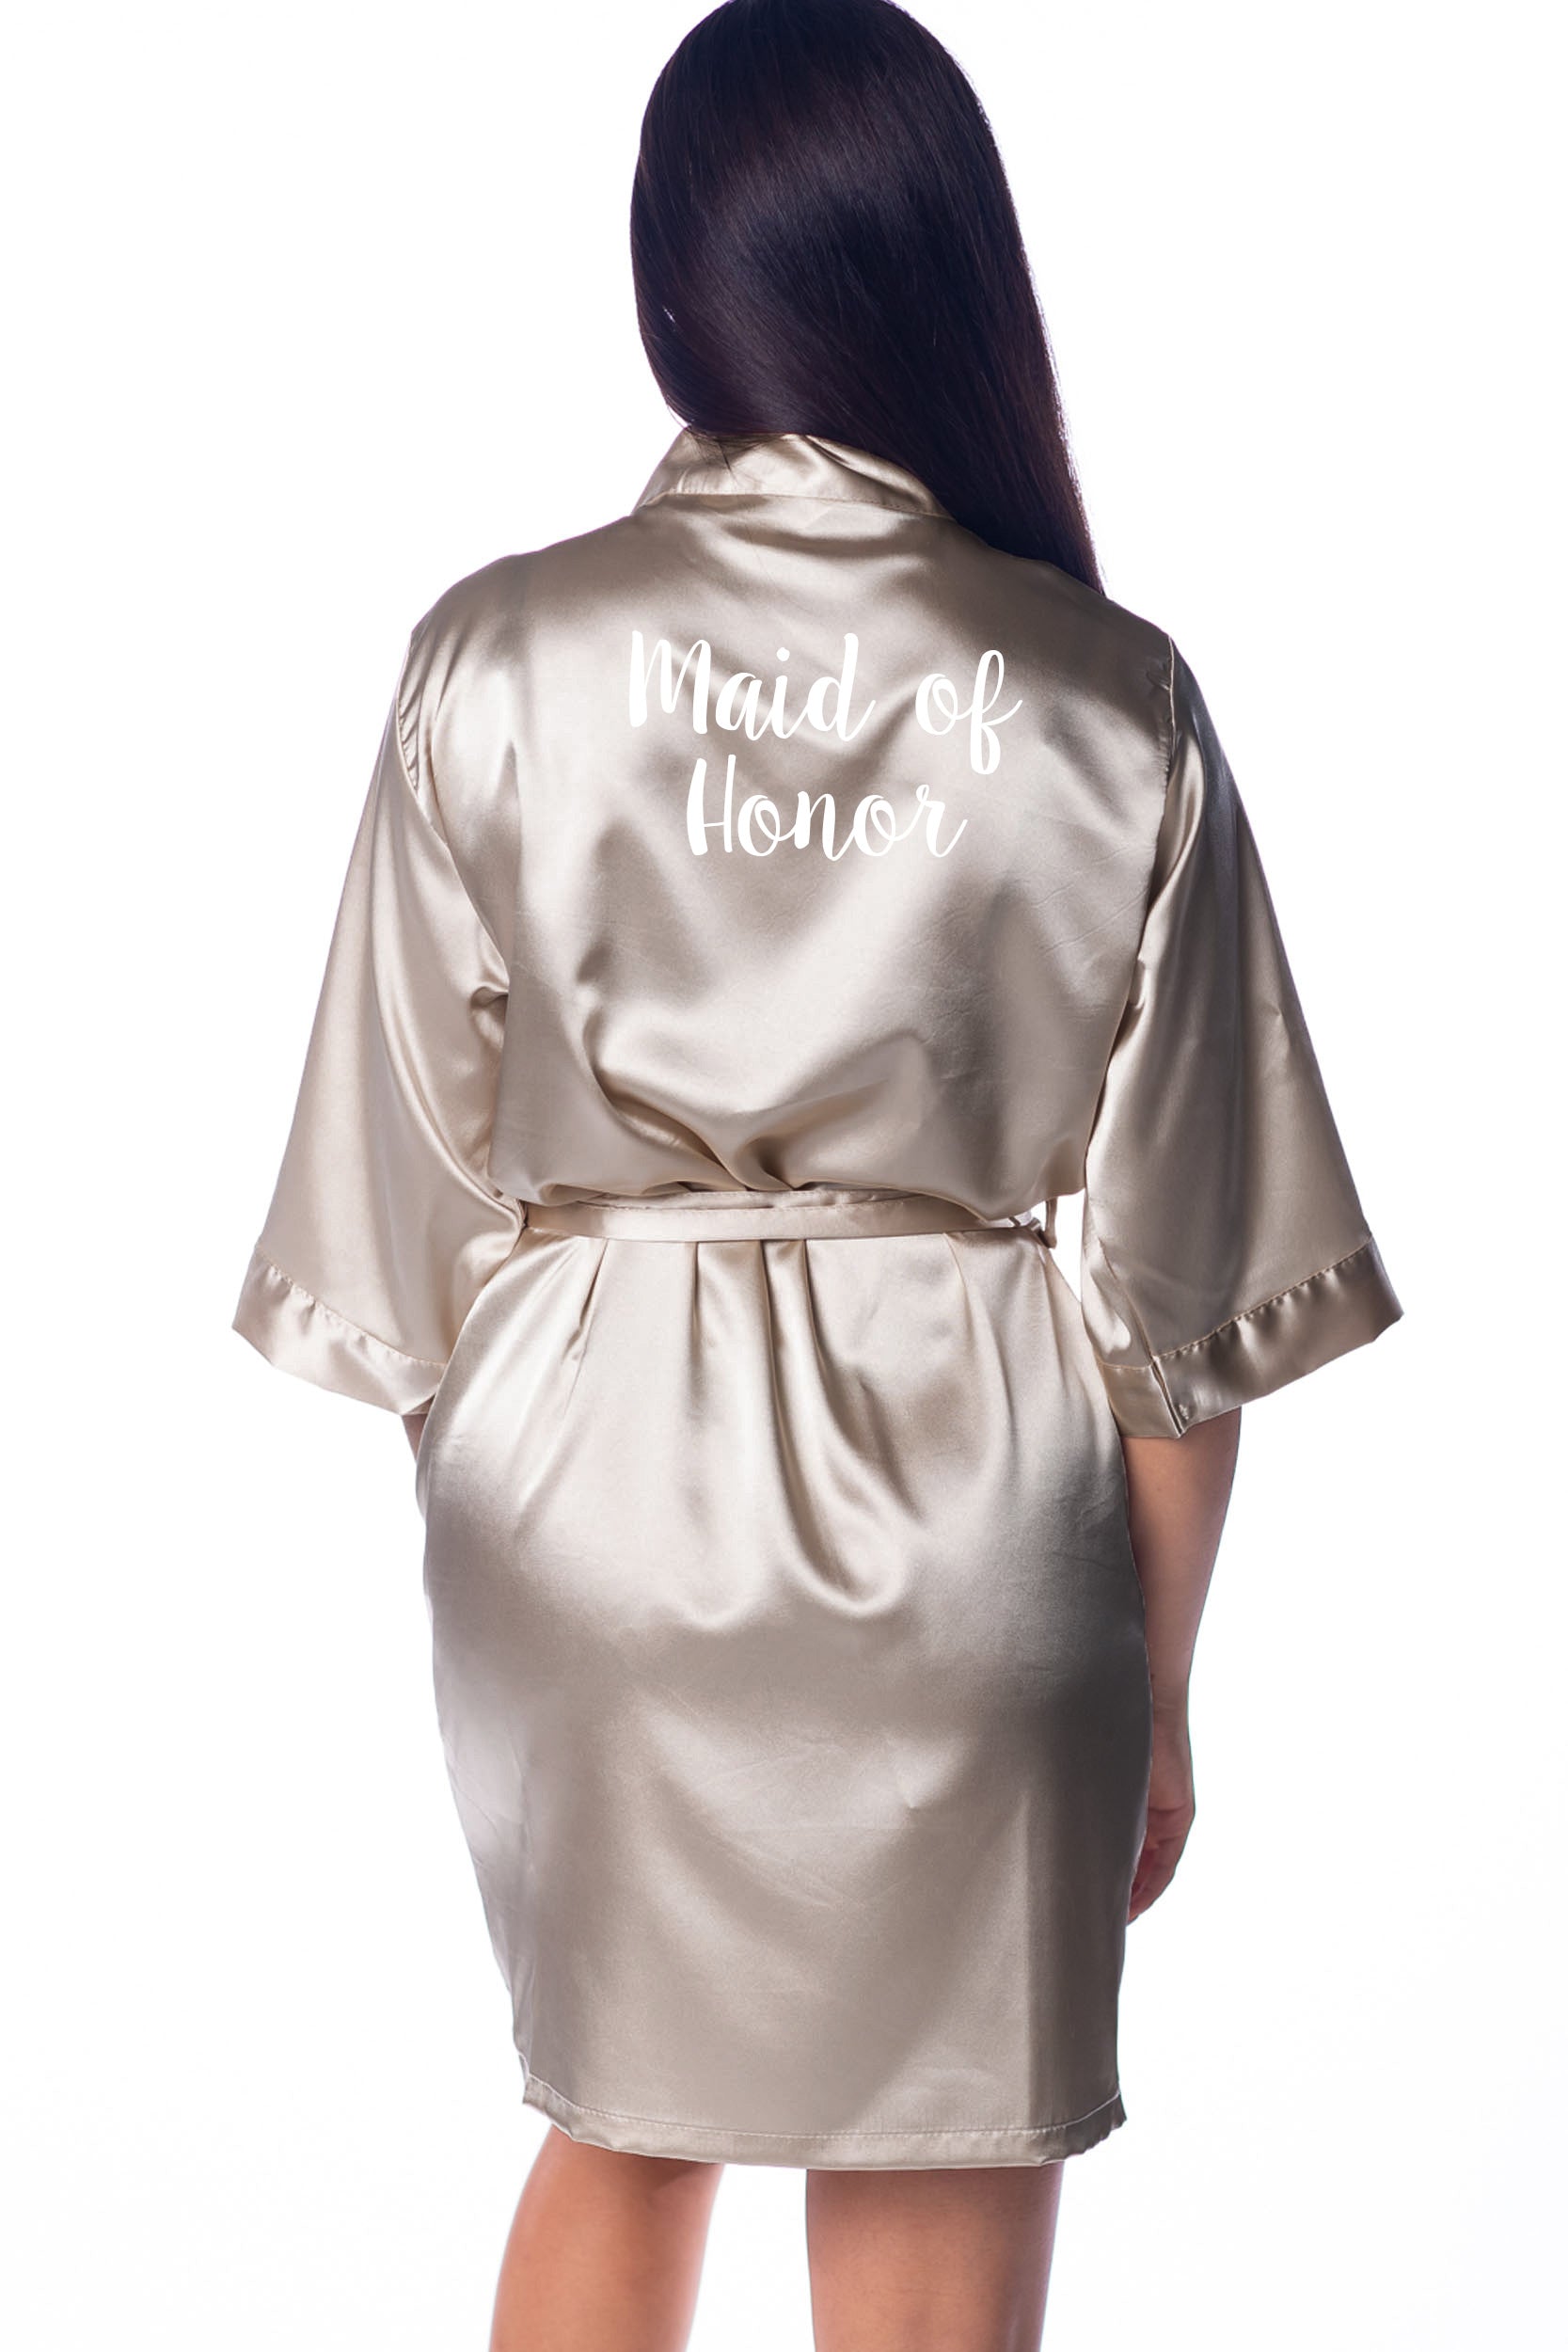 L/XL "Maid of Honor" Champagne Satin Robe - Sweetpea in White (Clearance Item)